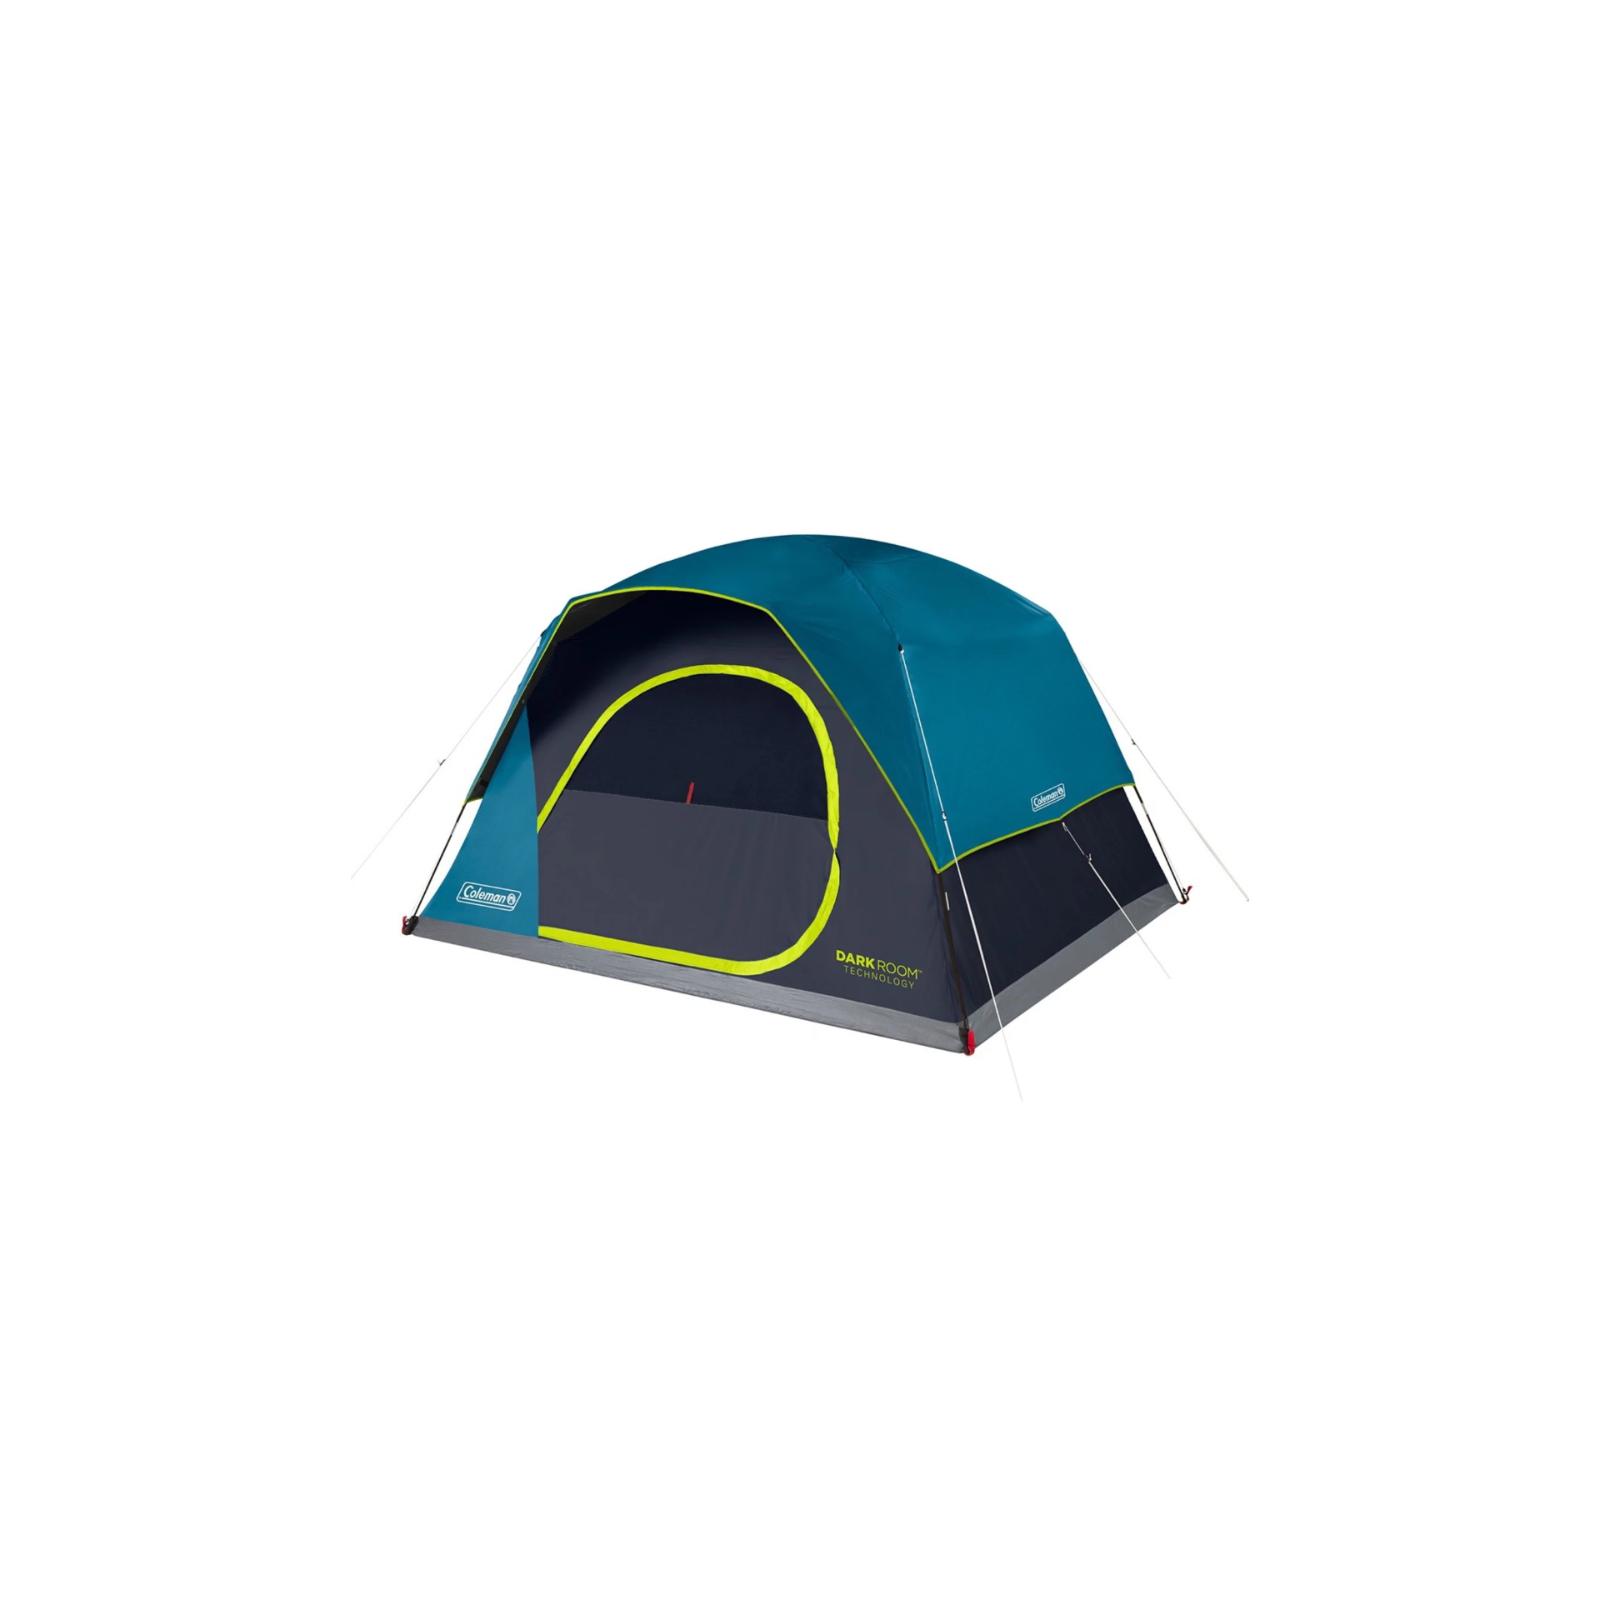 With a quick setup under 5 minutes, the Coleman Dark Room Skydome Camping Tent lets you enjoy more time with friends and family on your next camping trip. There is plenty of room to stretch inside the...